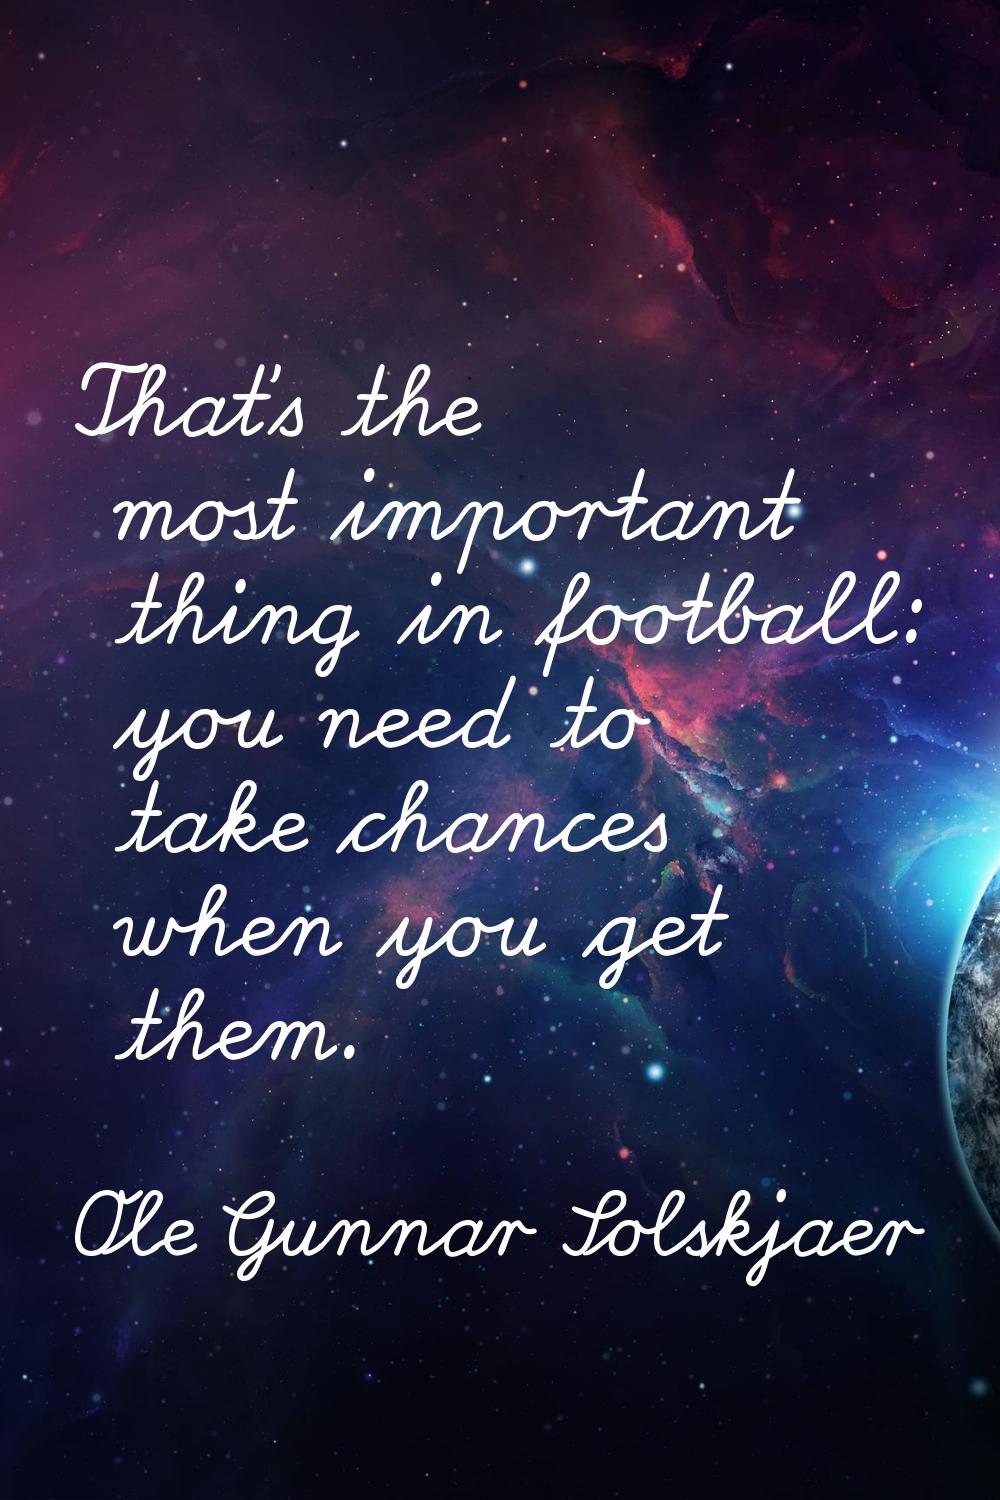 That's the most important thing in football: you need to take chances when you get them.